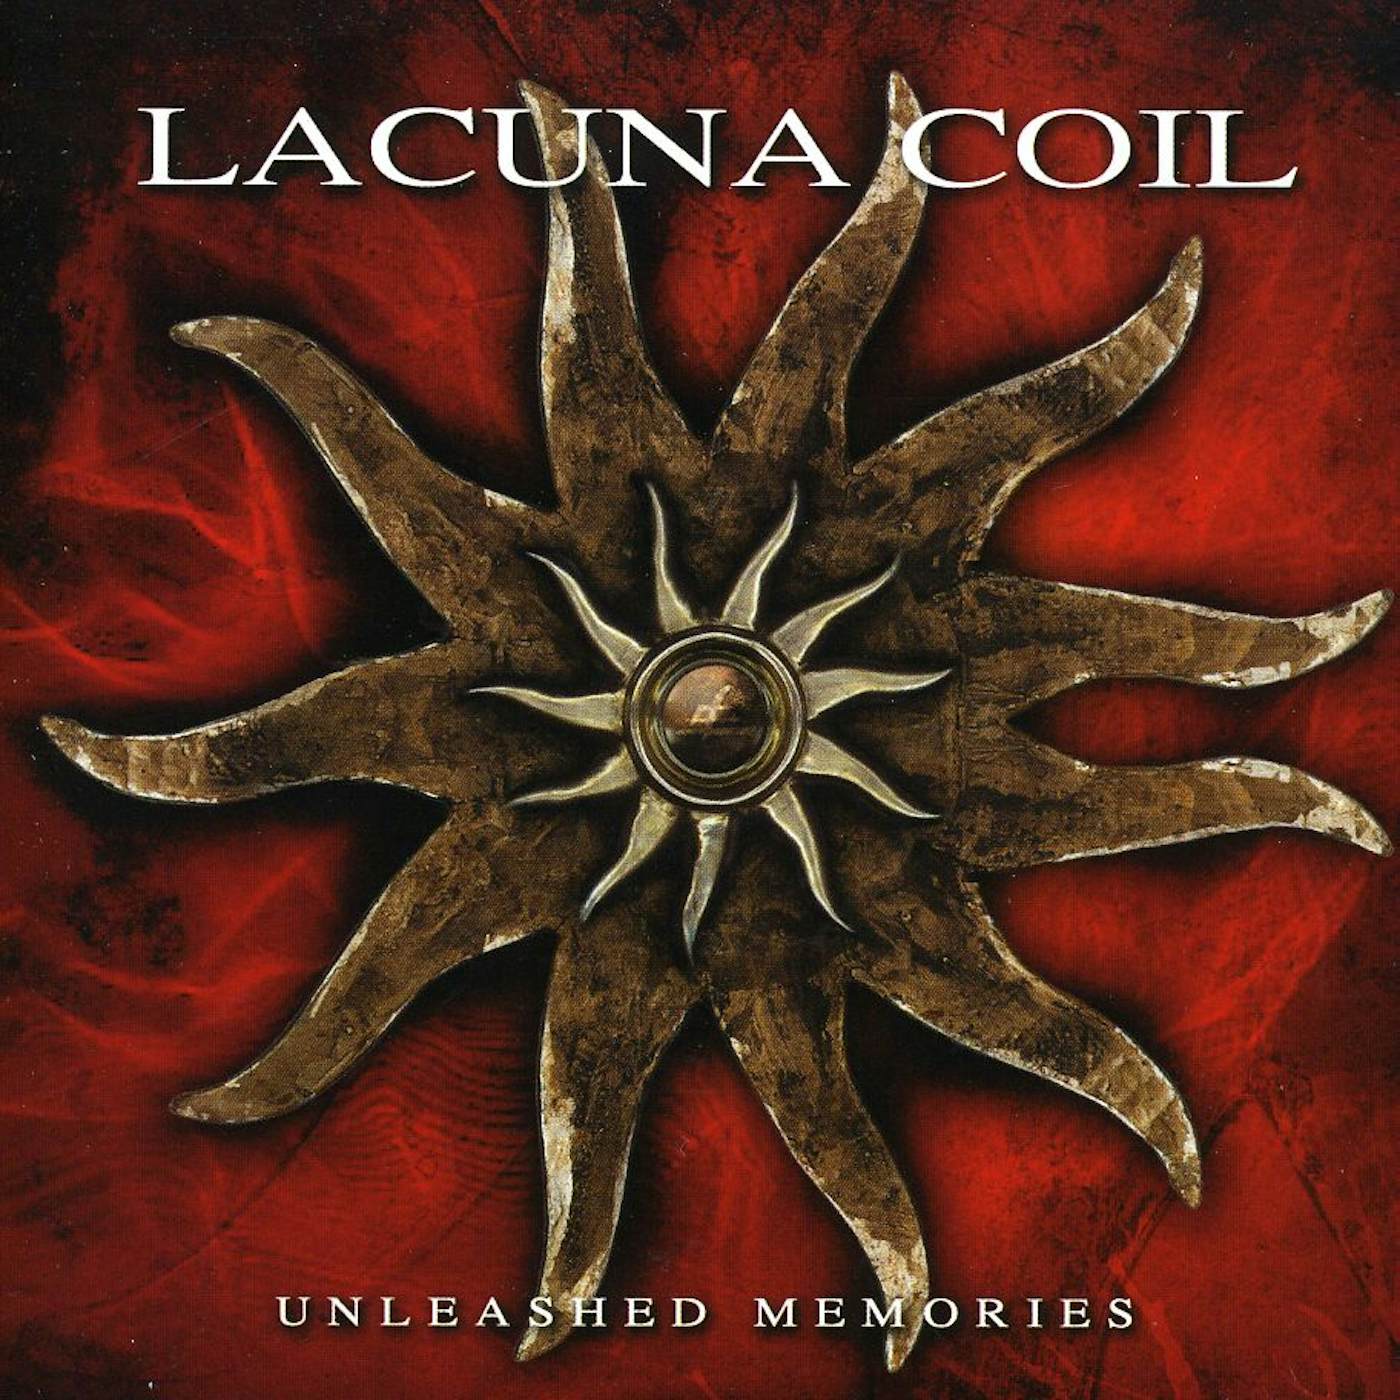 Lacuna Coil UNLEASHED MEMORIES CD